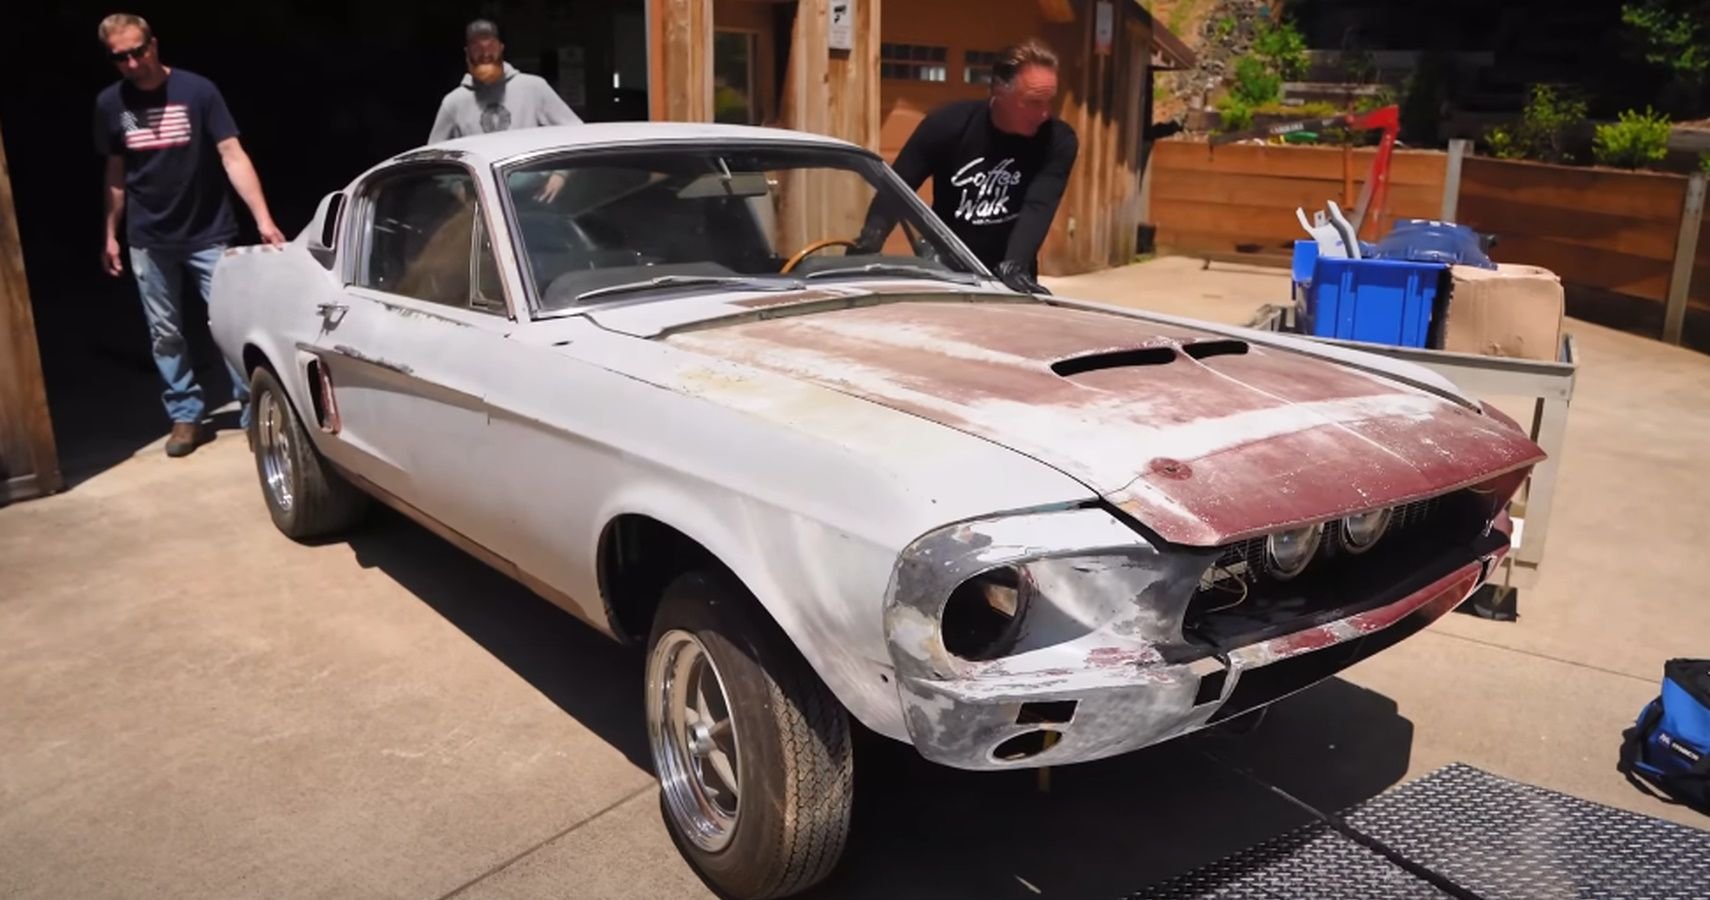 Dennis Collins Buys A 1967 Shelby Mustang GT500 From "James Bond"